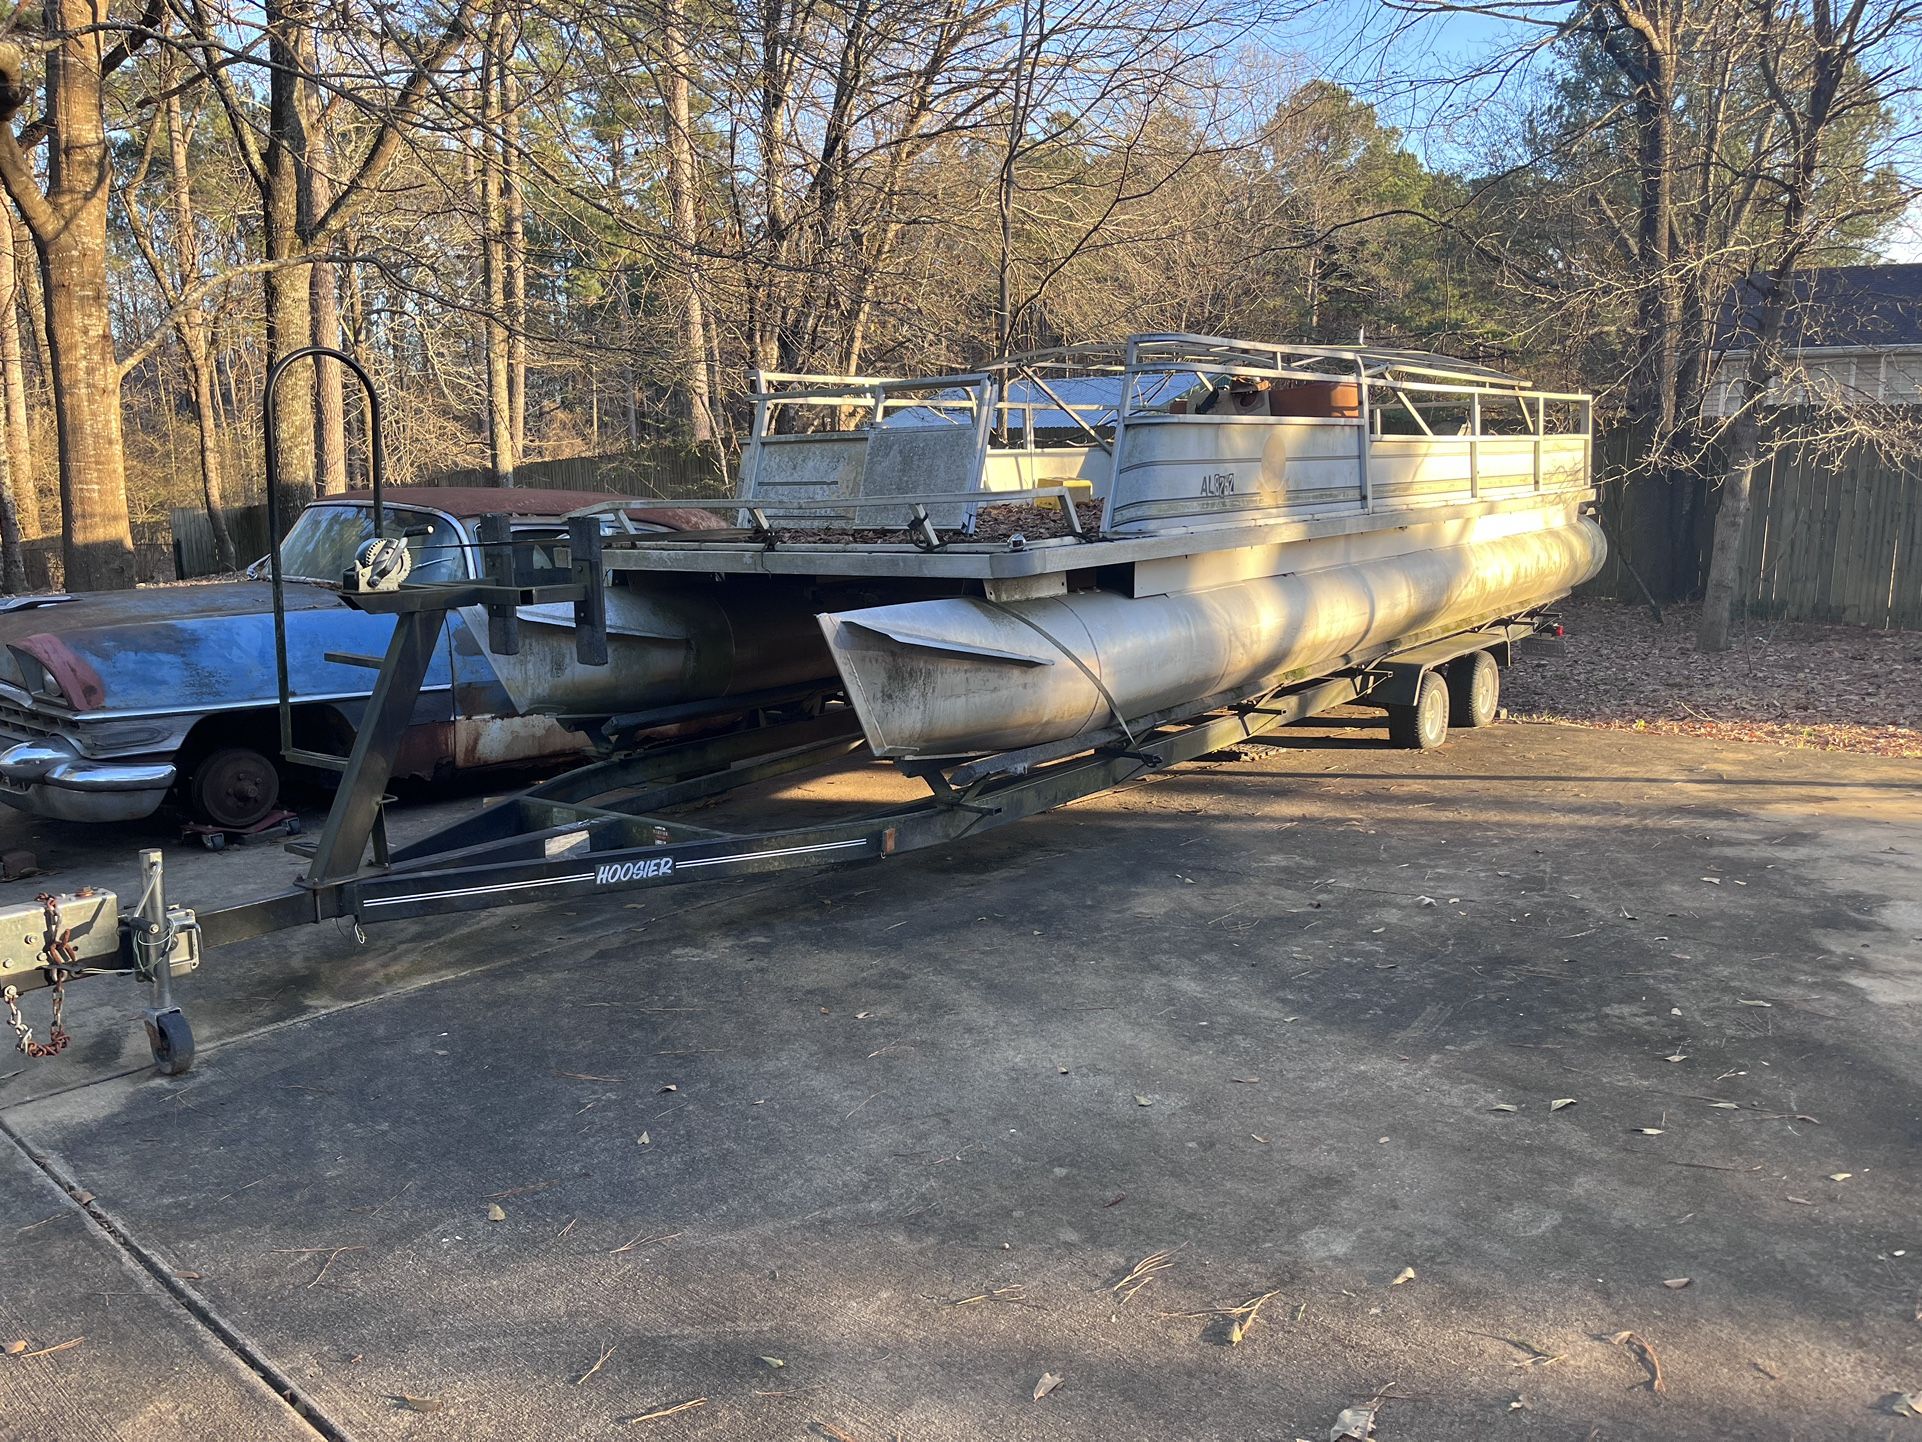 Pontoon Boat And Trailer